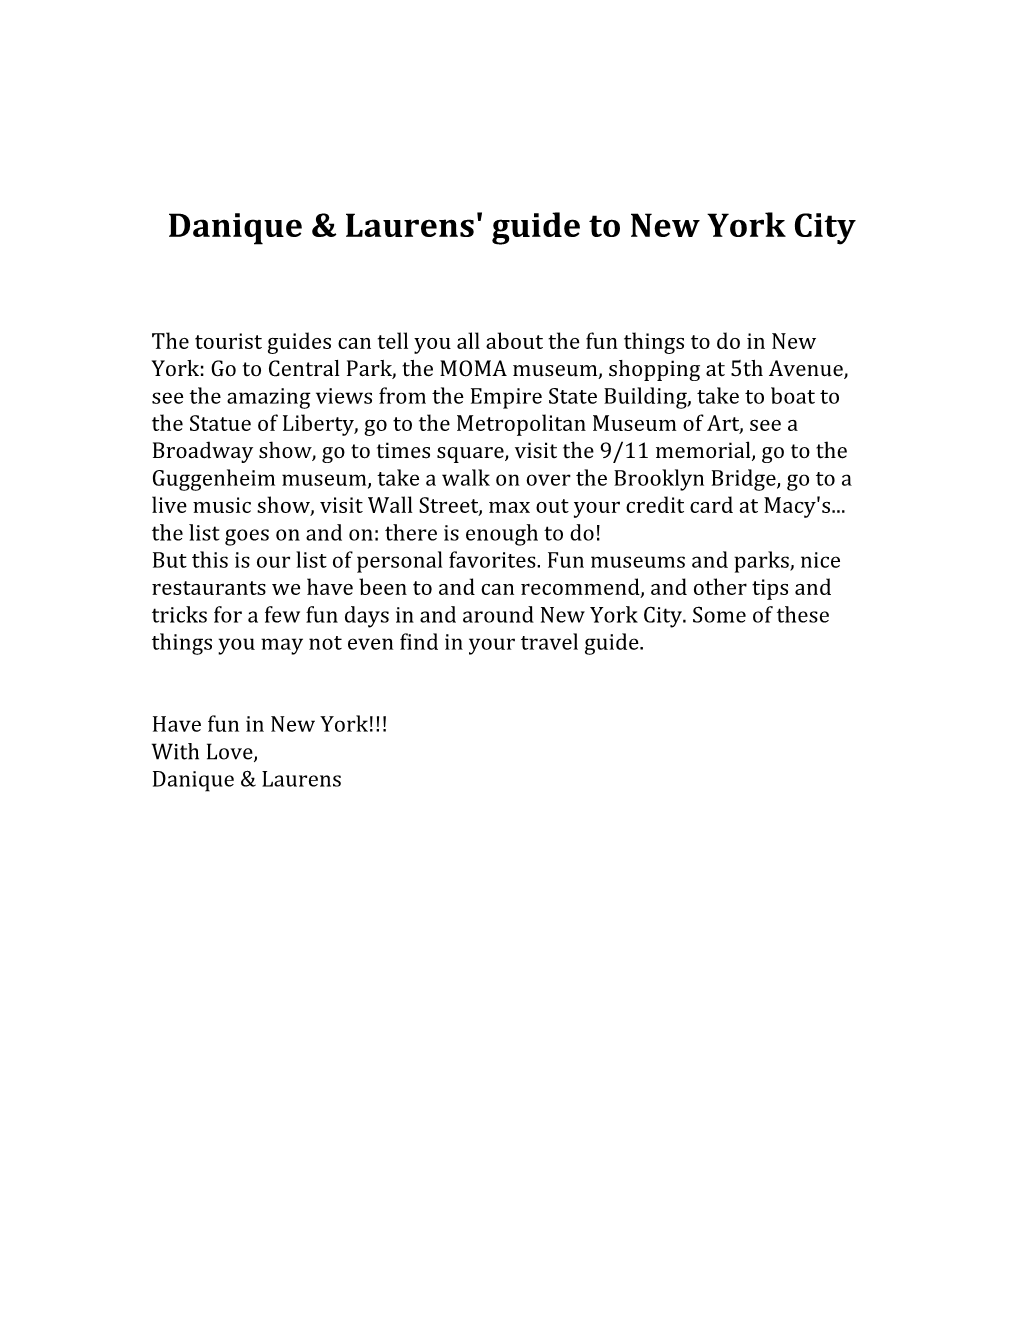 Danique & Laurens' Guide to New York City